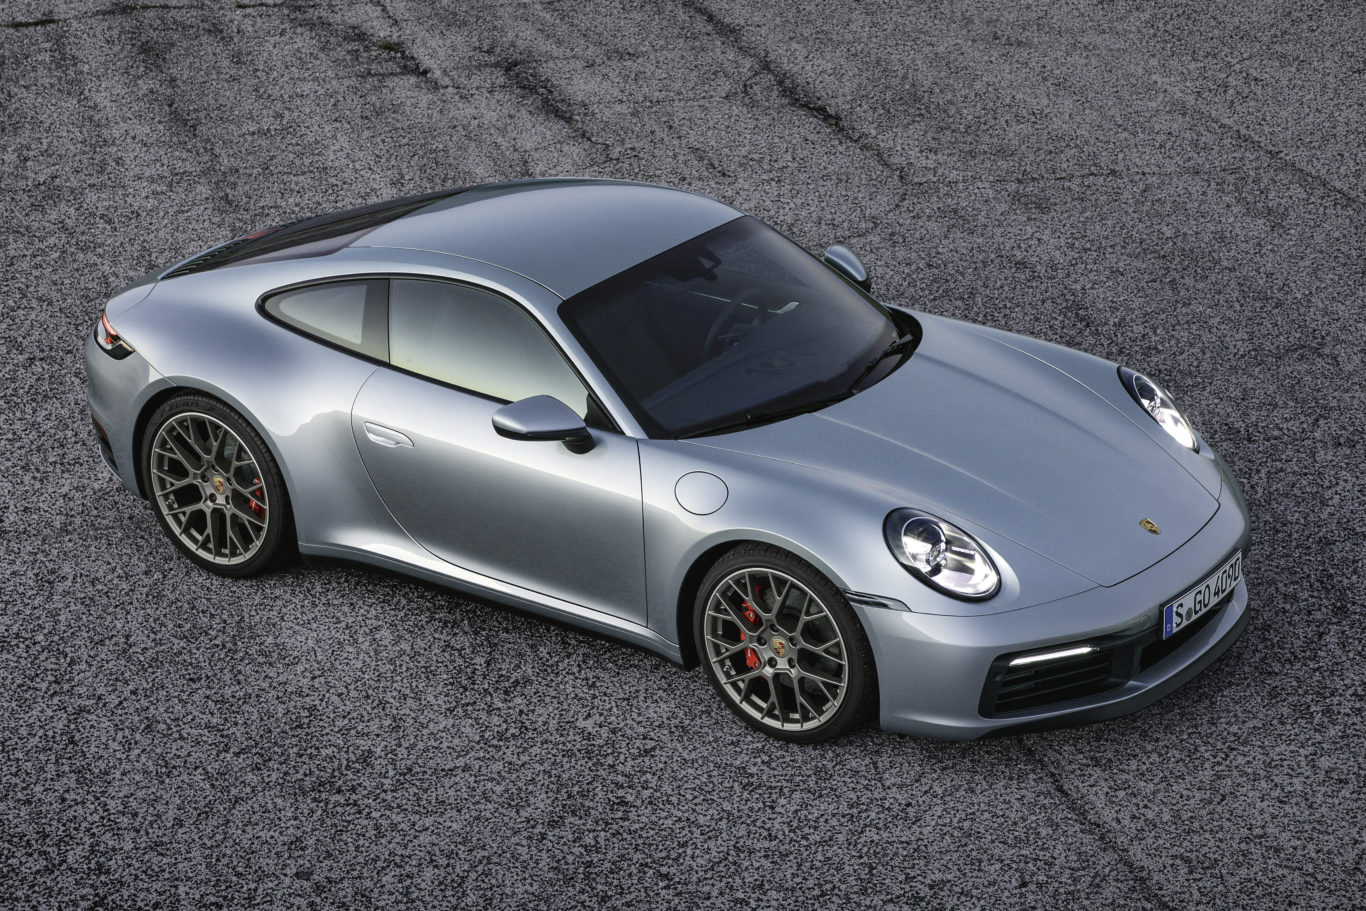 The new 911 has been completely overhauled to make it faster and more engaging than before